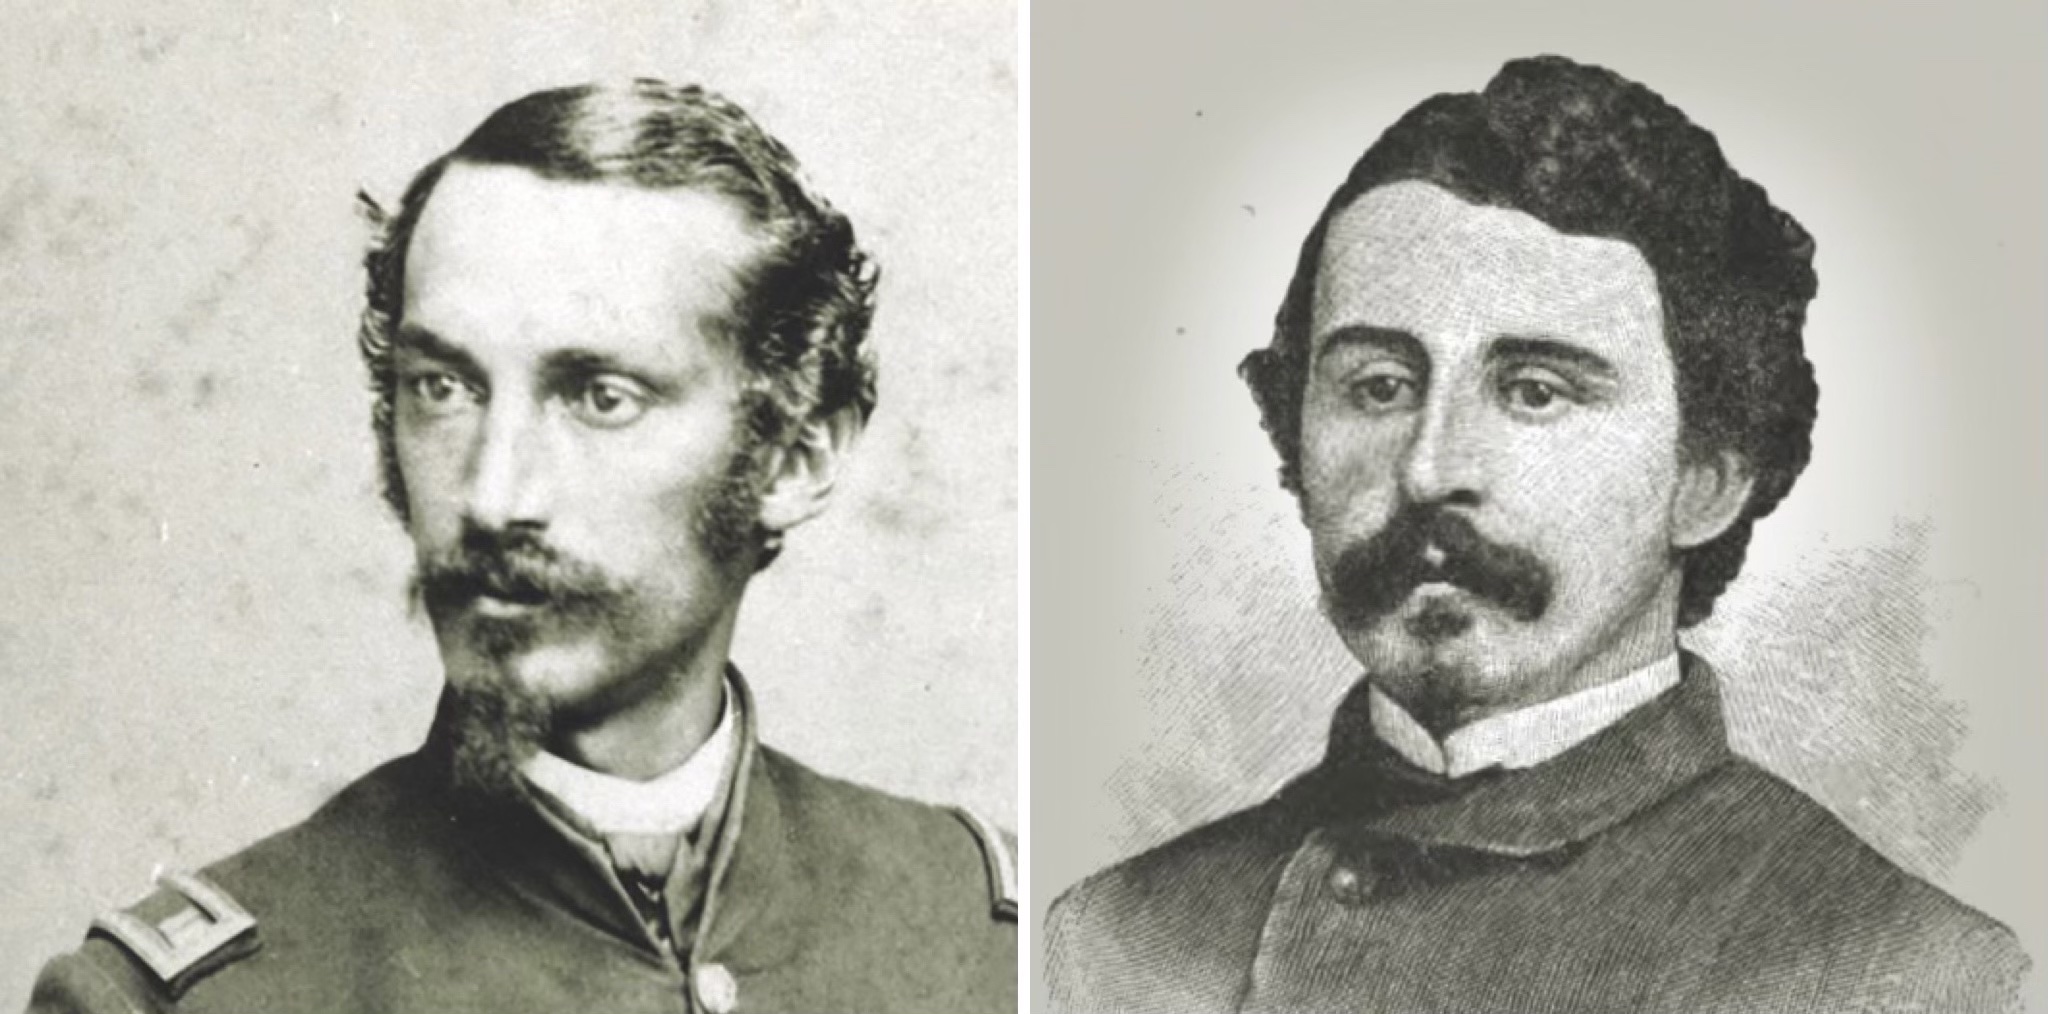 Lt. Col. Federico Cavada, left, was captured at Gettysburg. Lt. Col. Henry Pleasants, right, oversaw the digging of the mine at Petersburg, Va., that led to the notorious July 1864 Battle of the Crater. (Harper’s Weekly; Library of Congress) 